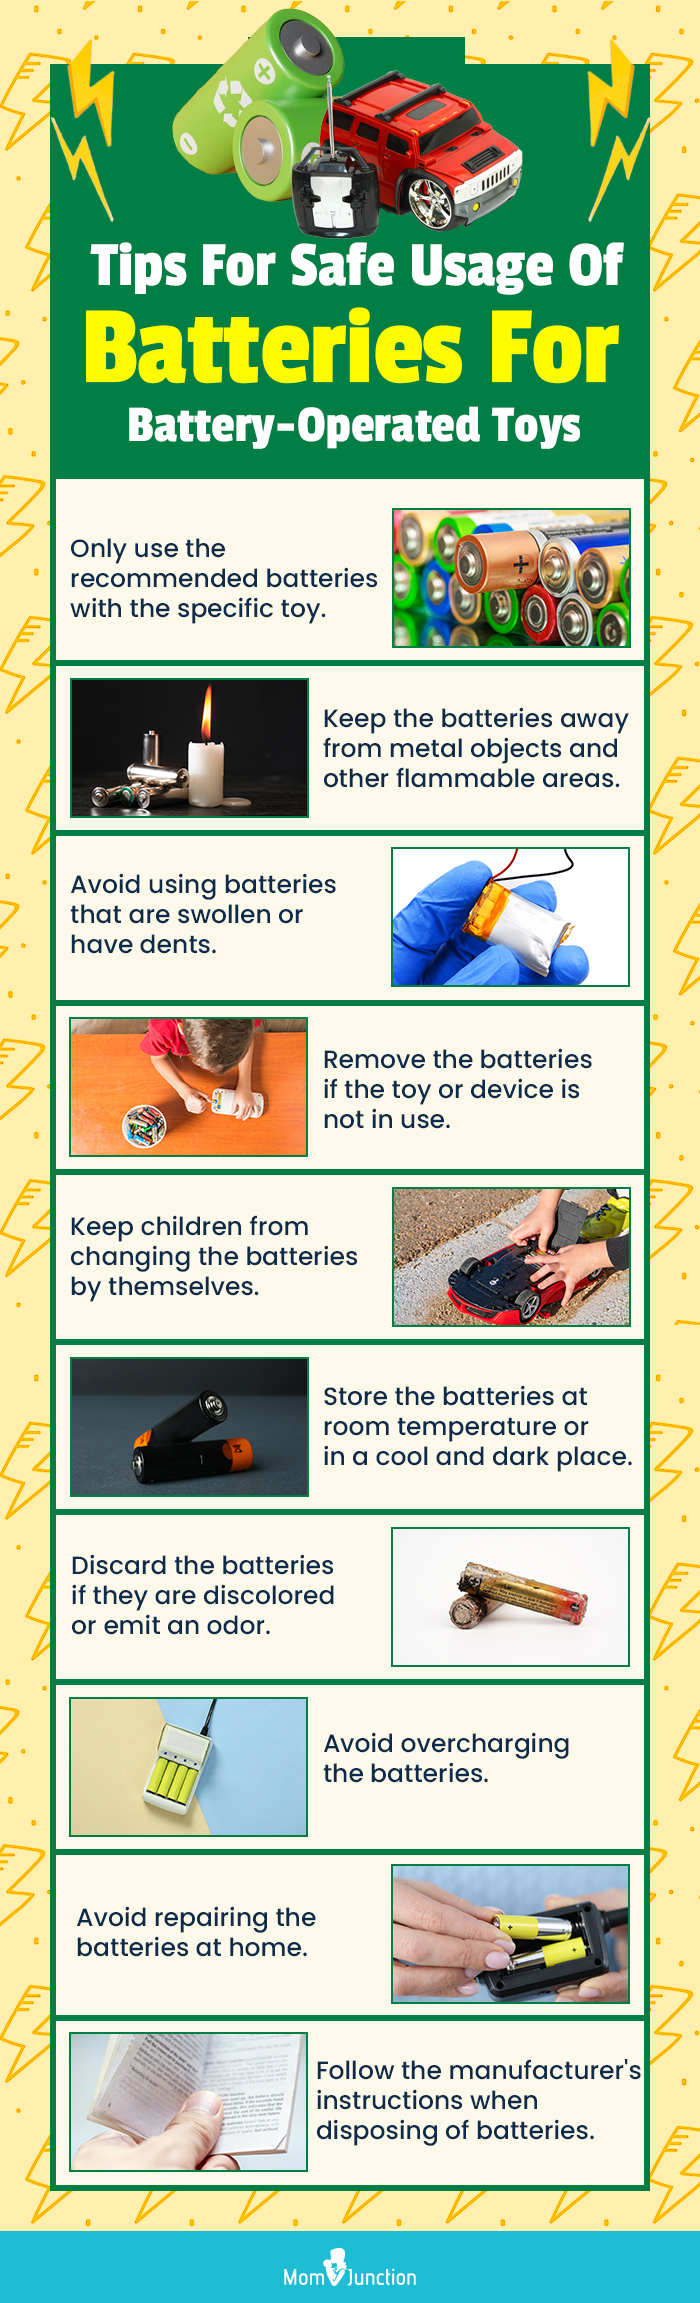 Tips For Safe Usage Of Batteries For Battery Operated Toys (infographic)